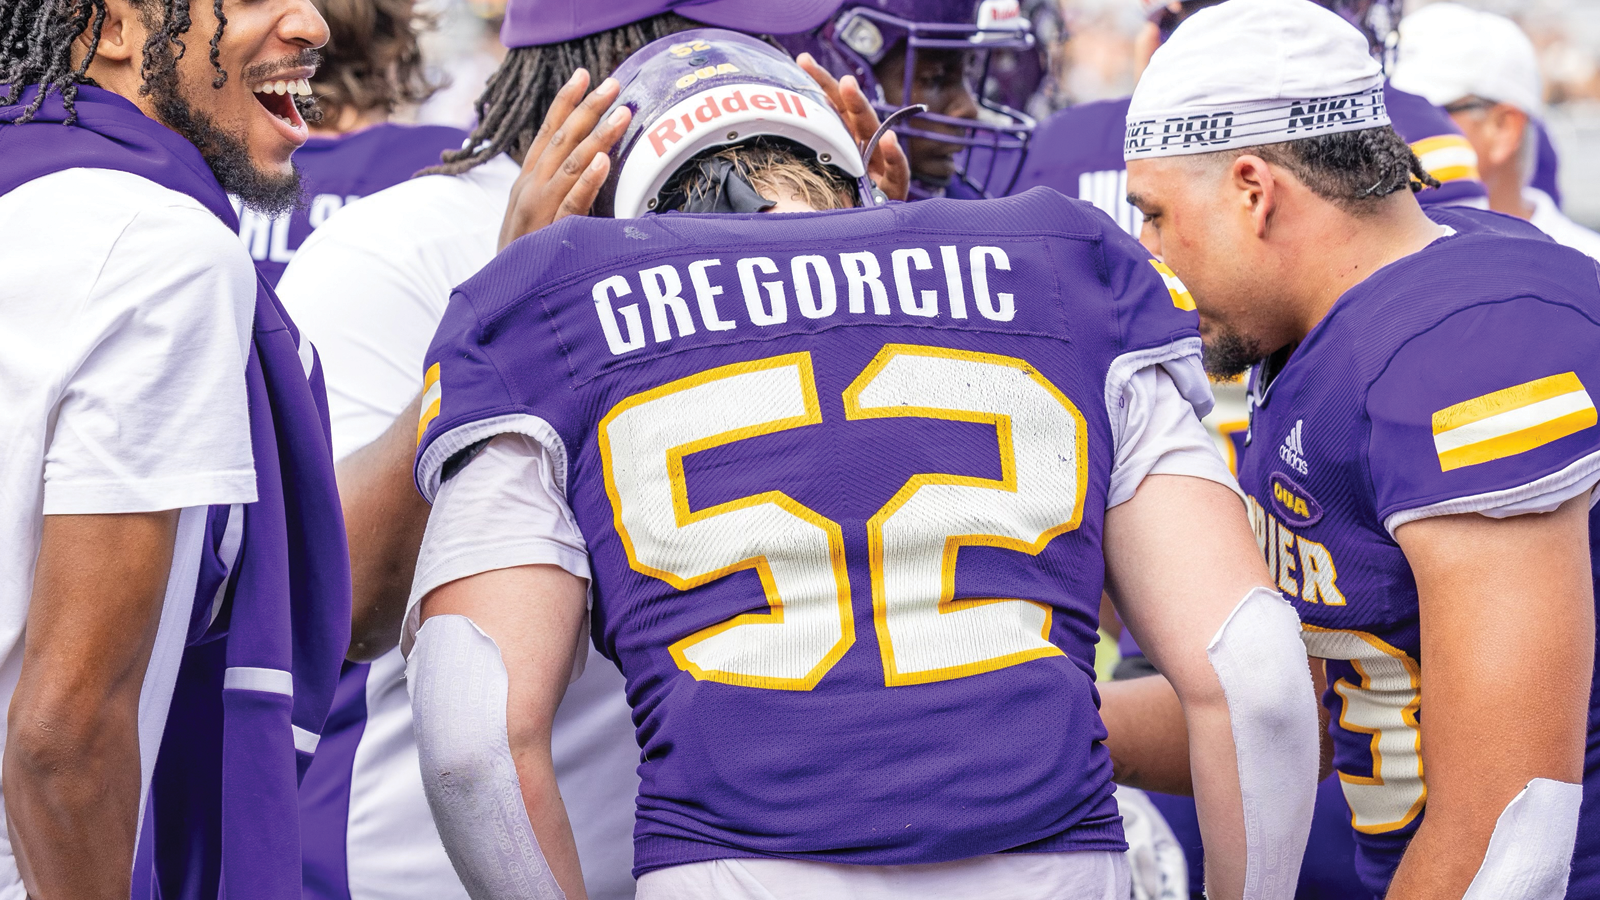 Action photo of Laurier football player Ethan Gregorcic facing away from the camera within a team huddle